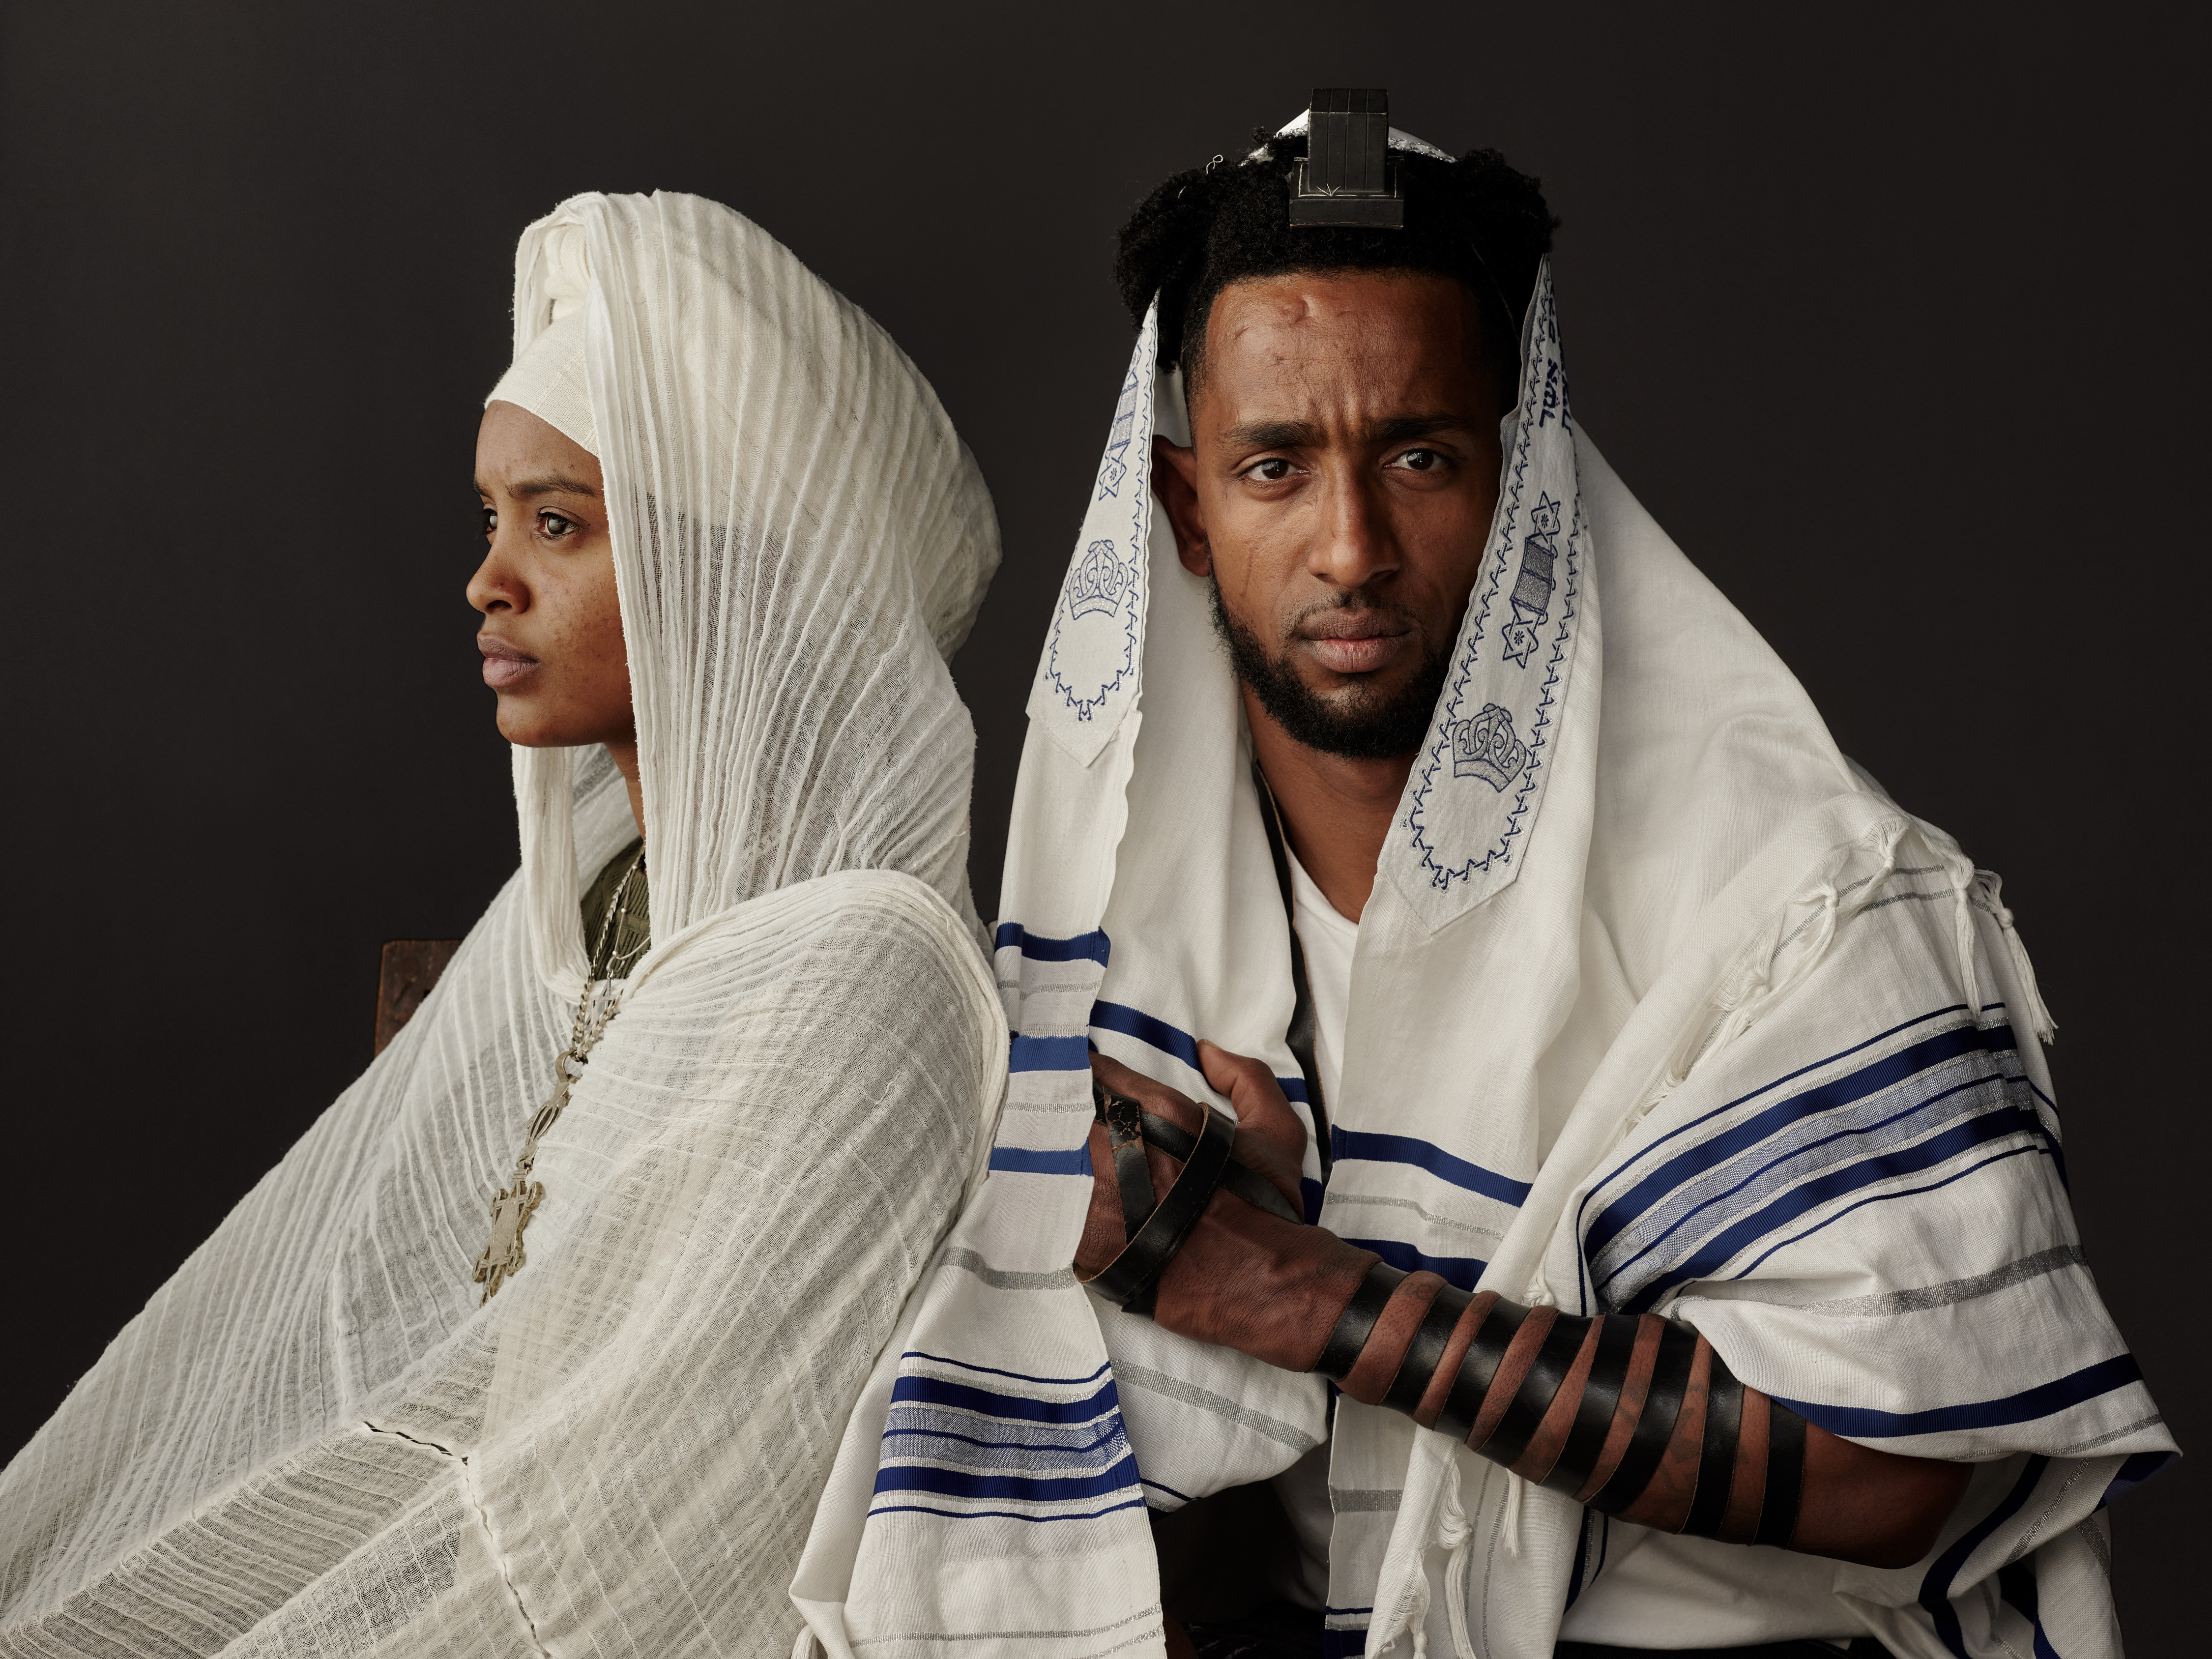 Ethiopia - Portraits - Portrait of Marealem and Fasikaw, members of the House of Israel